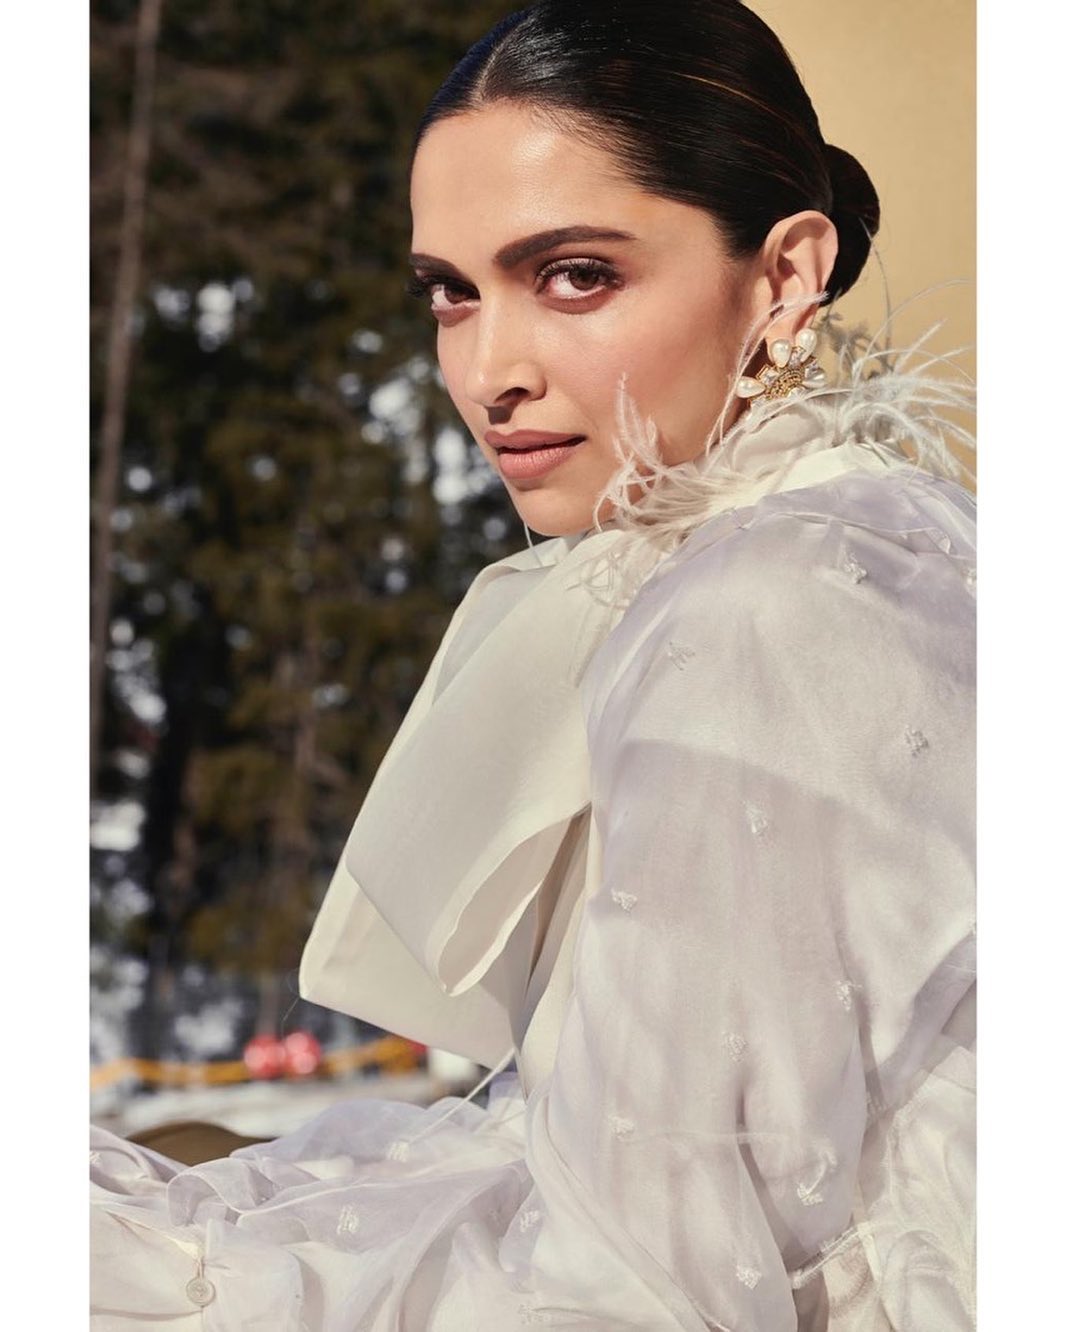 Deepika Padukone slays in an outfit from Louis Vuitton While at